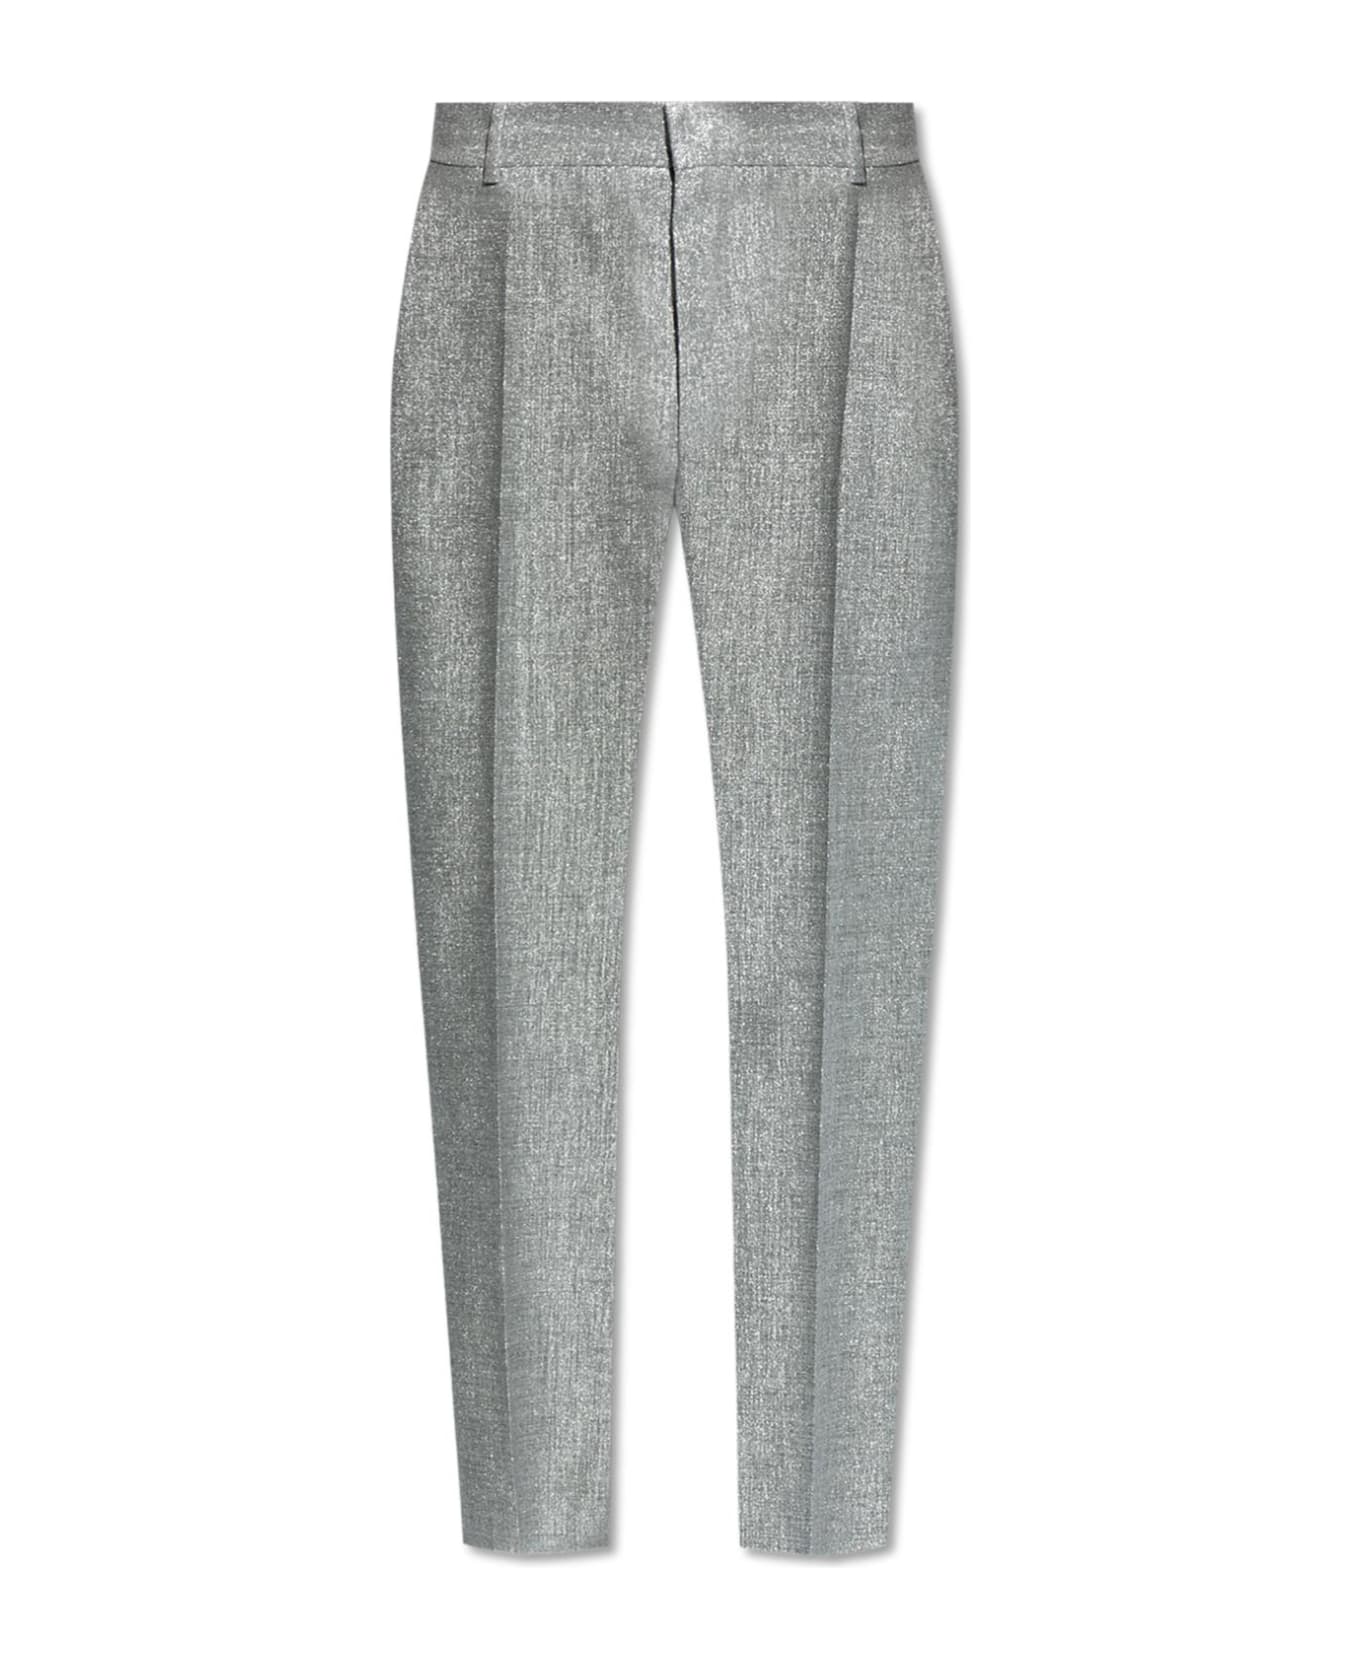 Alexander McQueen Creased Trousers - Silver